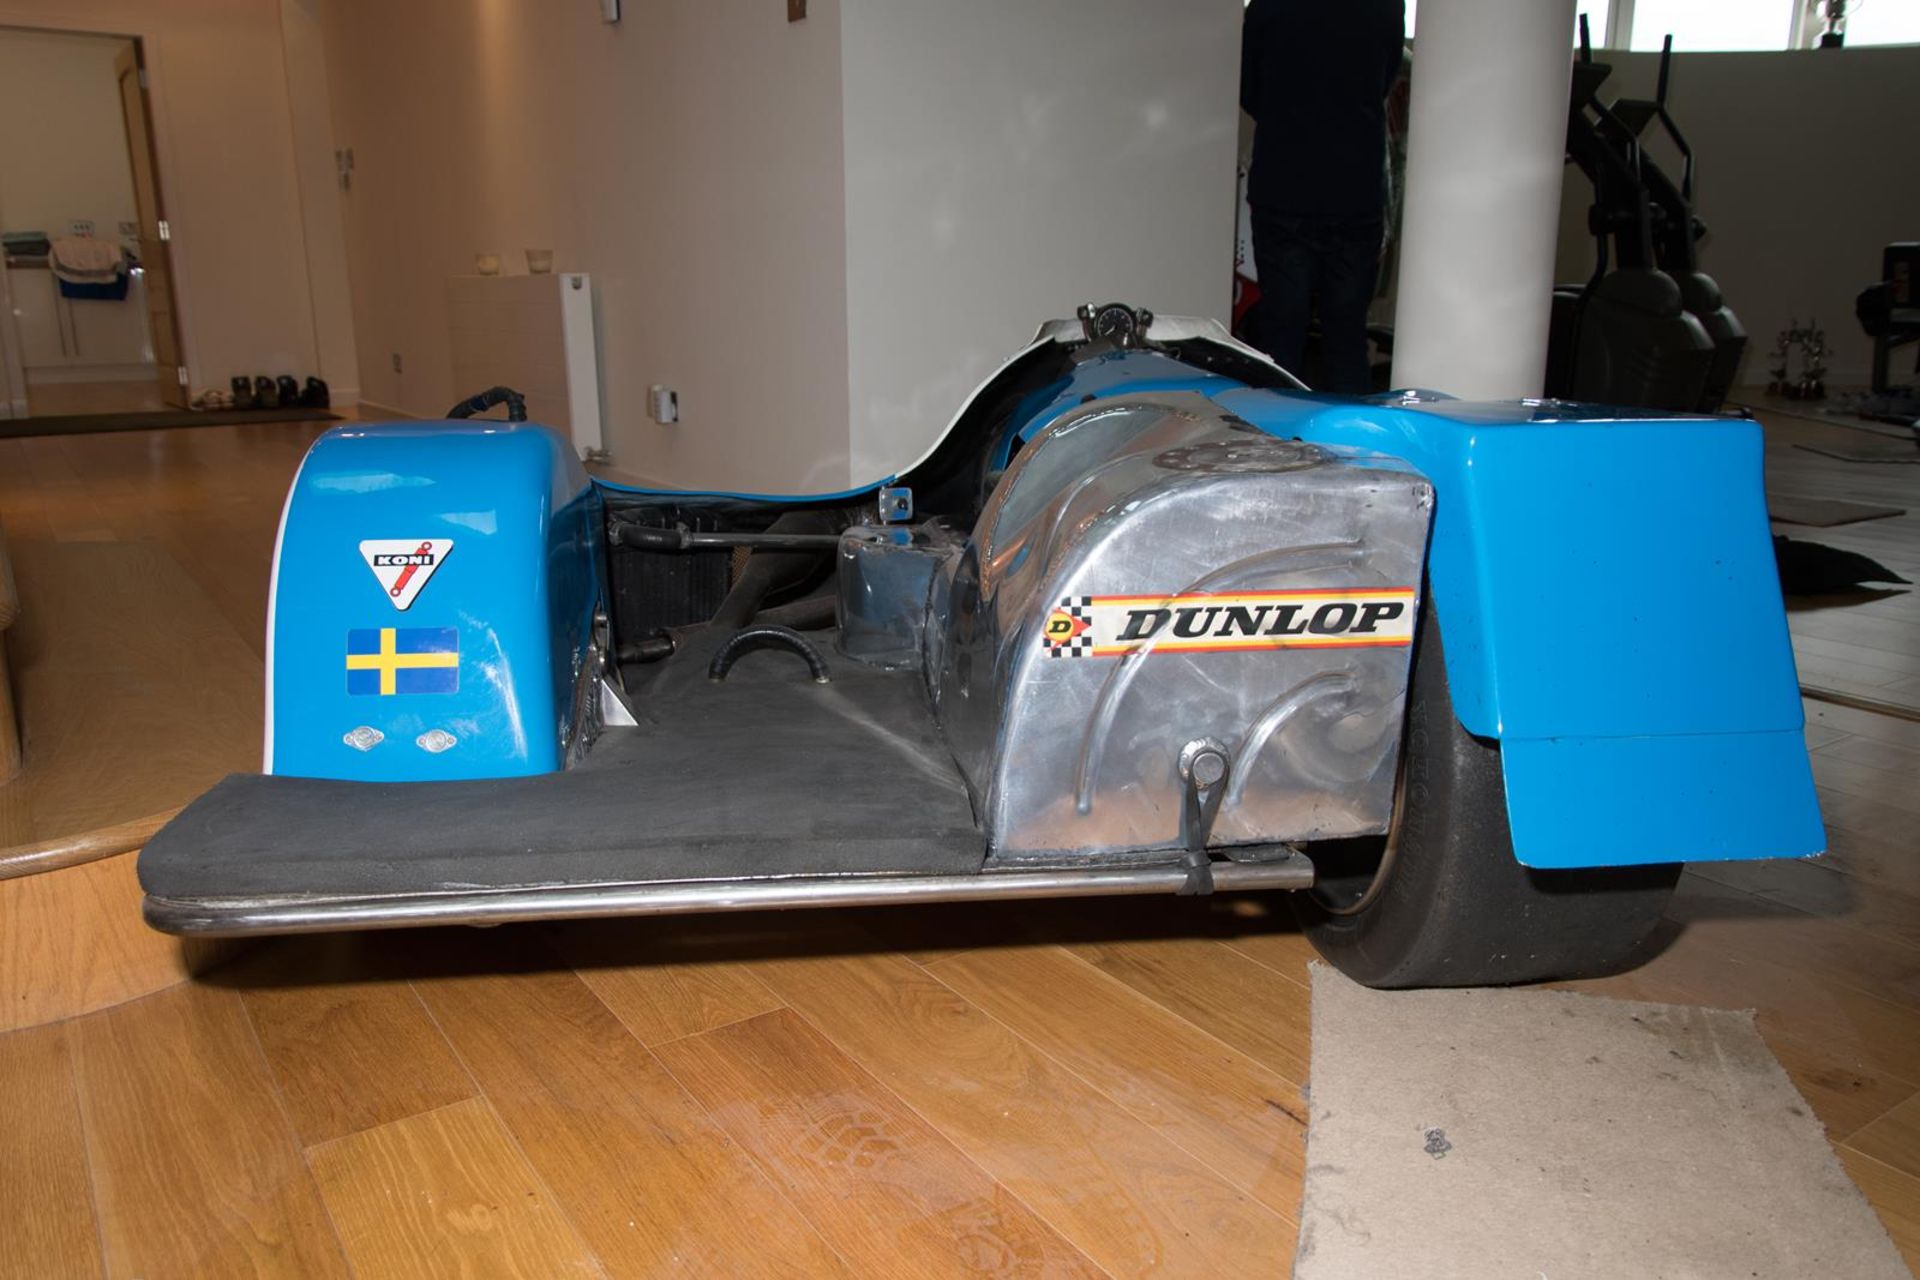 The 1980 Windle TZ 500/700 World Championship and TT winning Sidecar Outfit In 1979 Sidecar - Image 9 of 31